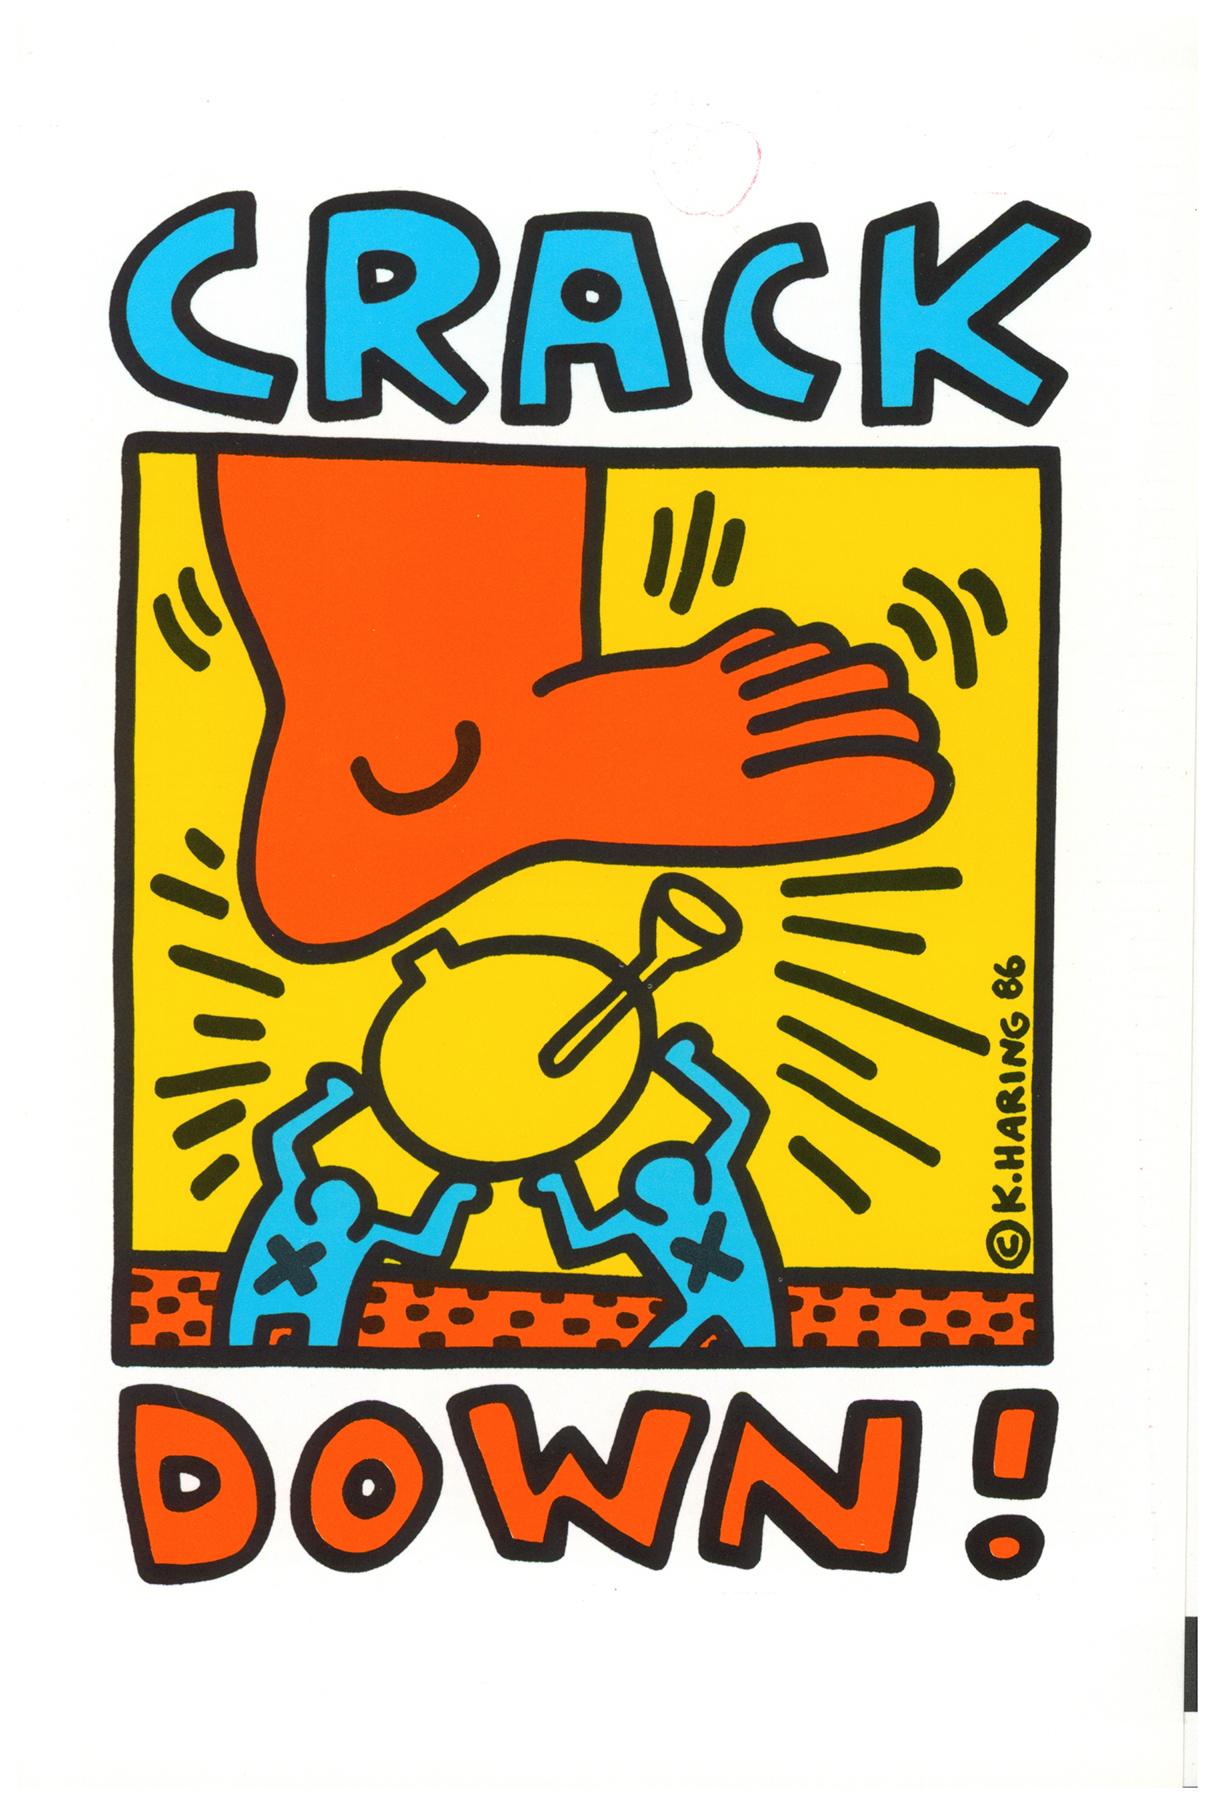 Keith Haring crack down! 1986: Vintage original 1986 Keith Haring illustrated Crack Down! benefit  program.  

This folding pamphlet was designed & illustrated by Keith Haring (along with a poster of same), for the 1986 "Crackdown on Crack" concert